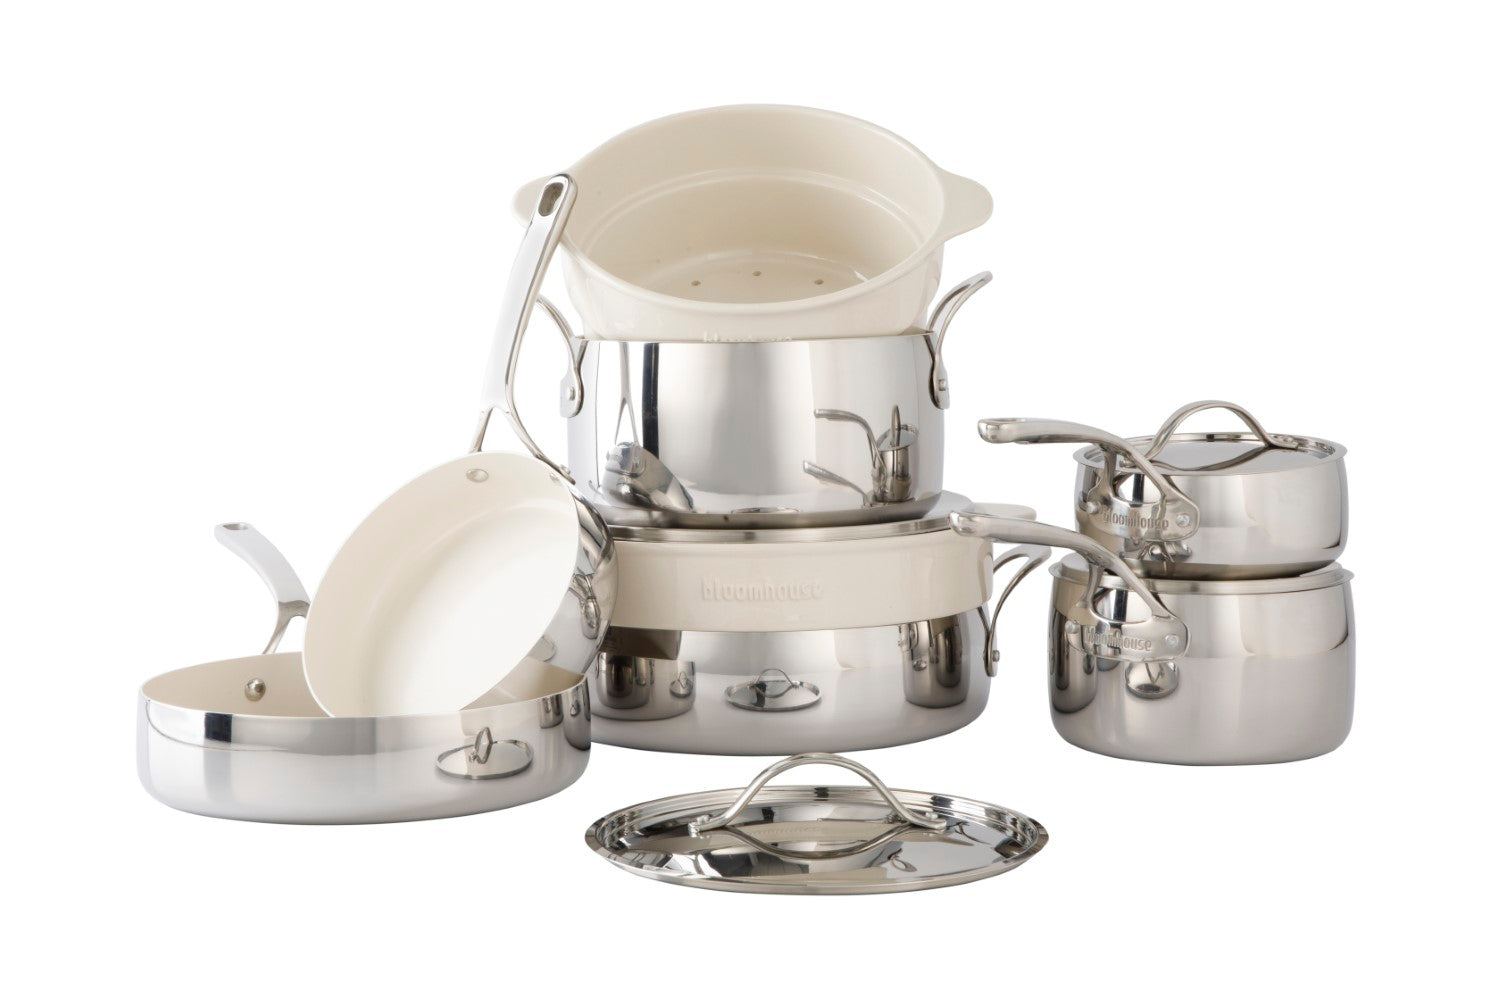 Stainless Steel Cookware, Non-Toxic Pots & Pans Set